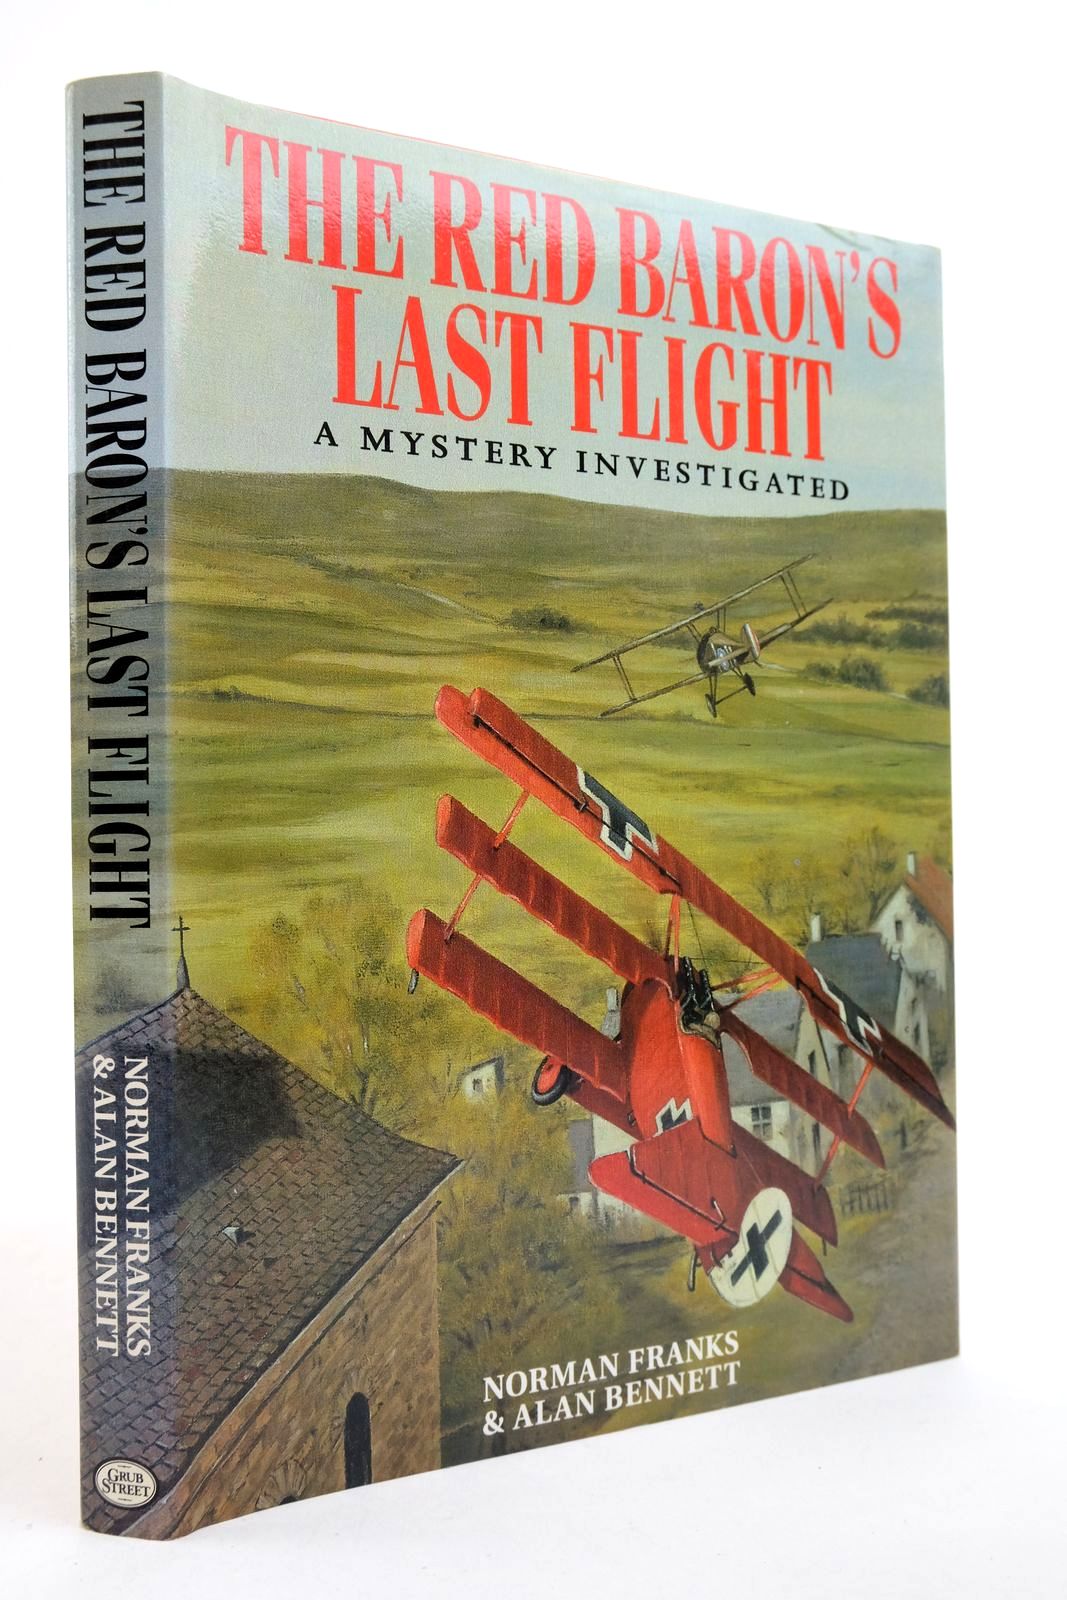 Photo of THE RED BARON'S LAST FLIGHT: A MYSTERY INVESTIGATED written by Franks, Norman Bennett, Alan published by Grub Street (STOCK CODE: 2140046)  for sale by Stella & Rose's Books